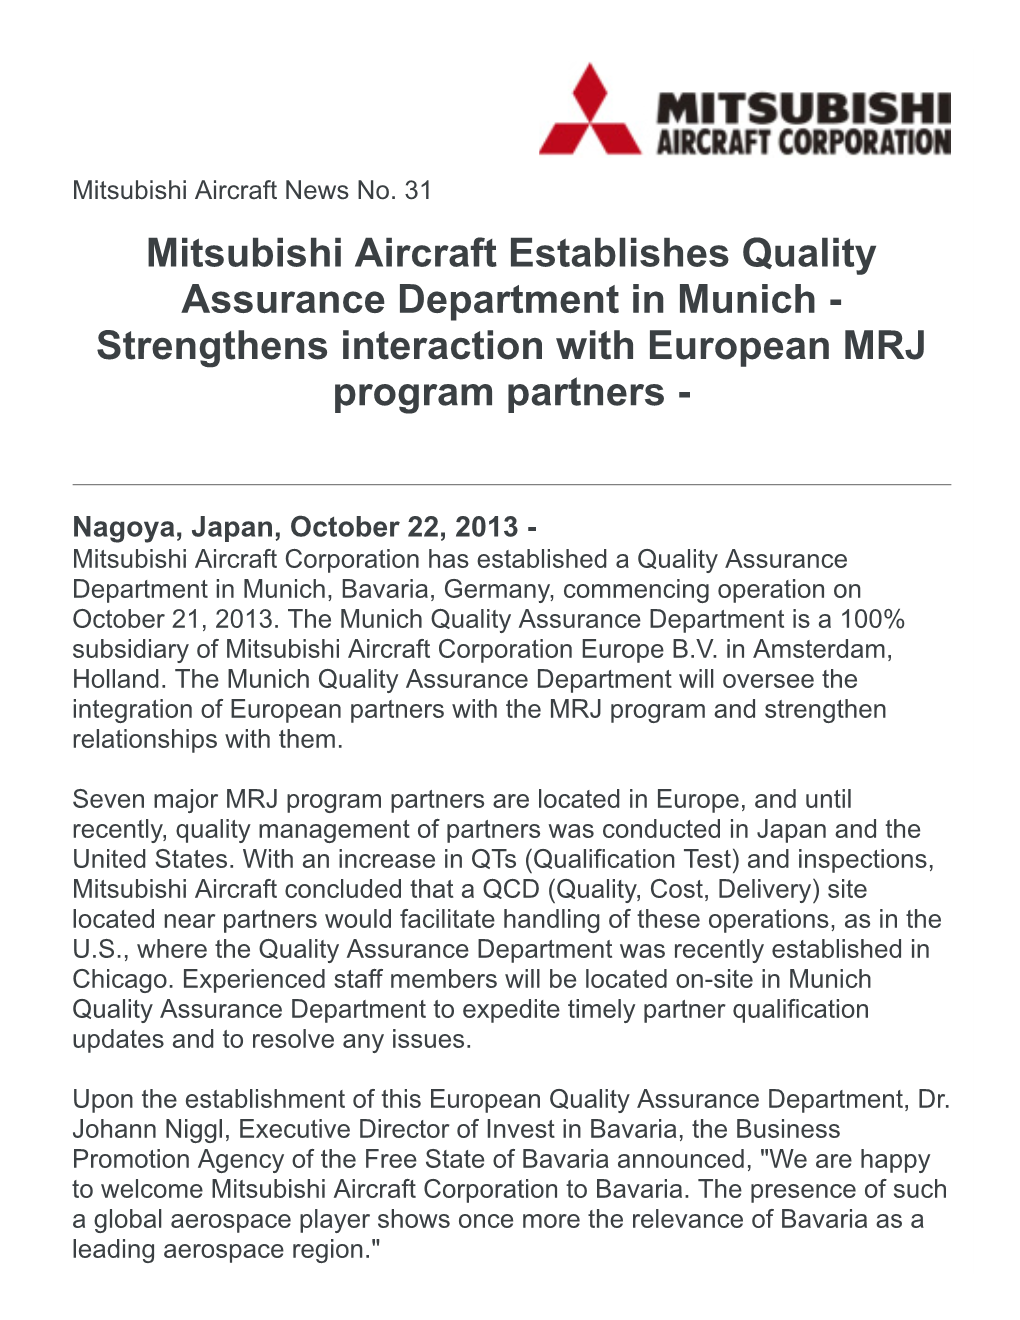 Mitsubishi Aircraft Establishes Quality Assurance Department in Munich - Strengthens Interaction with European MRJ Program Partners